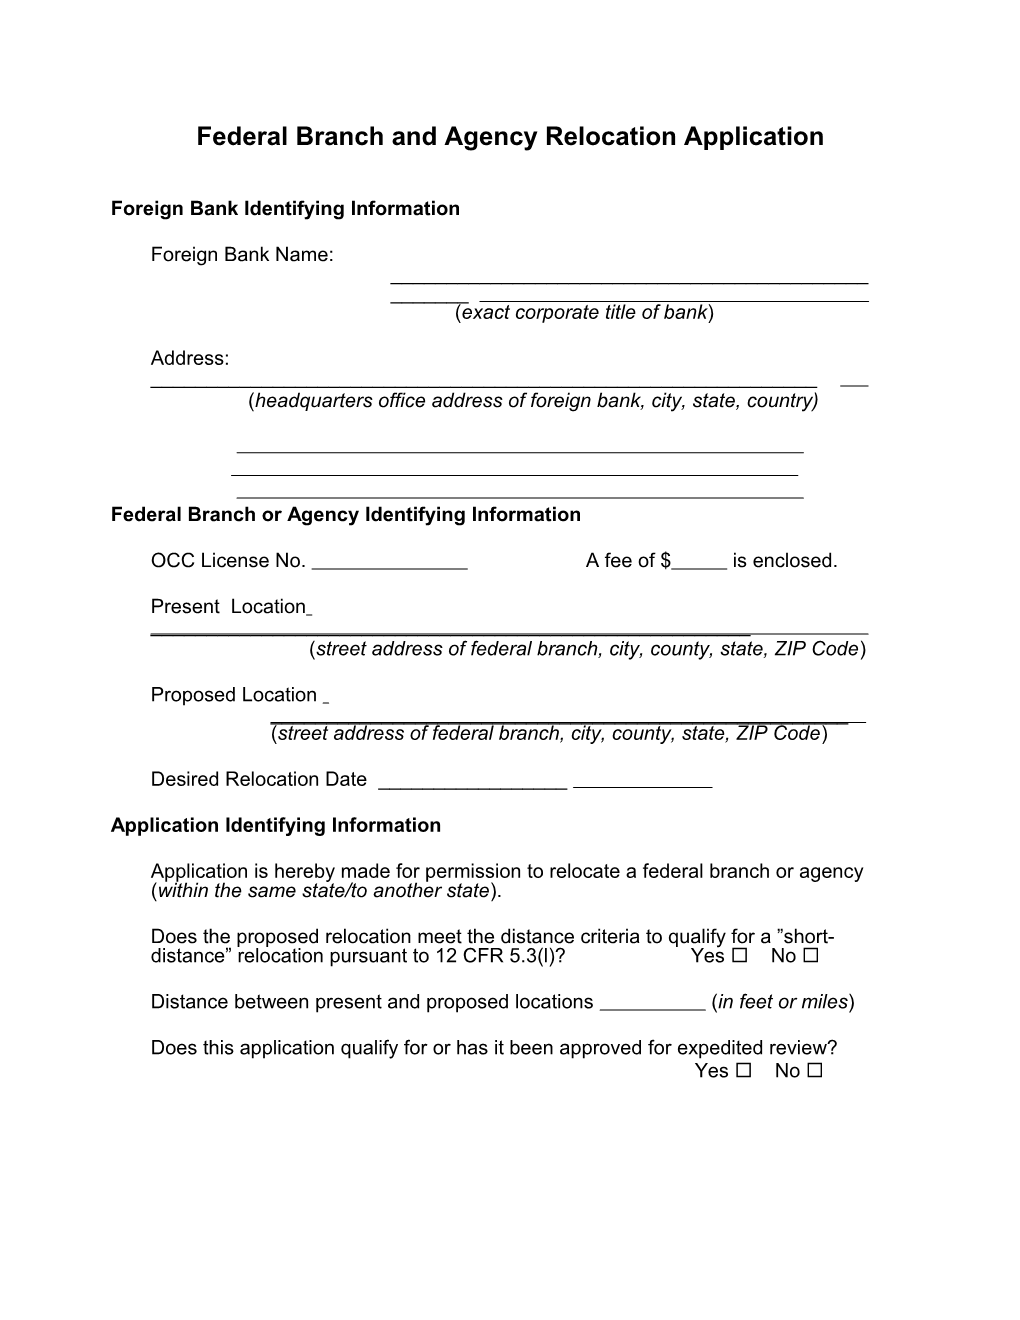 Federal Branch and Agency Relocation Application